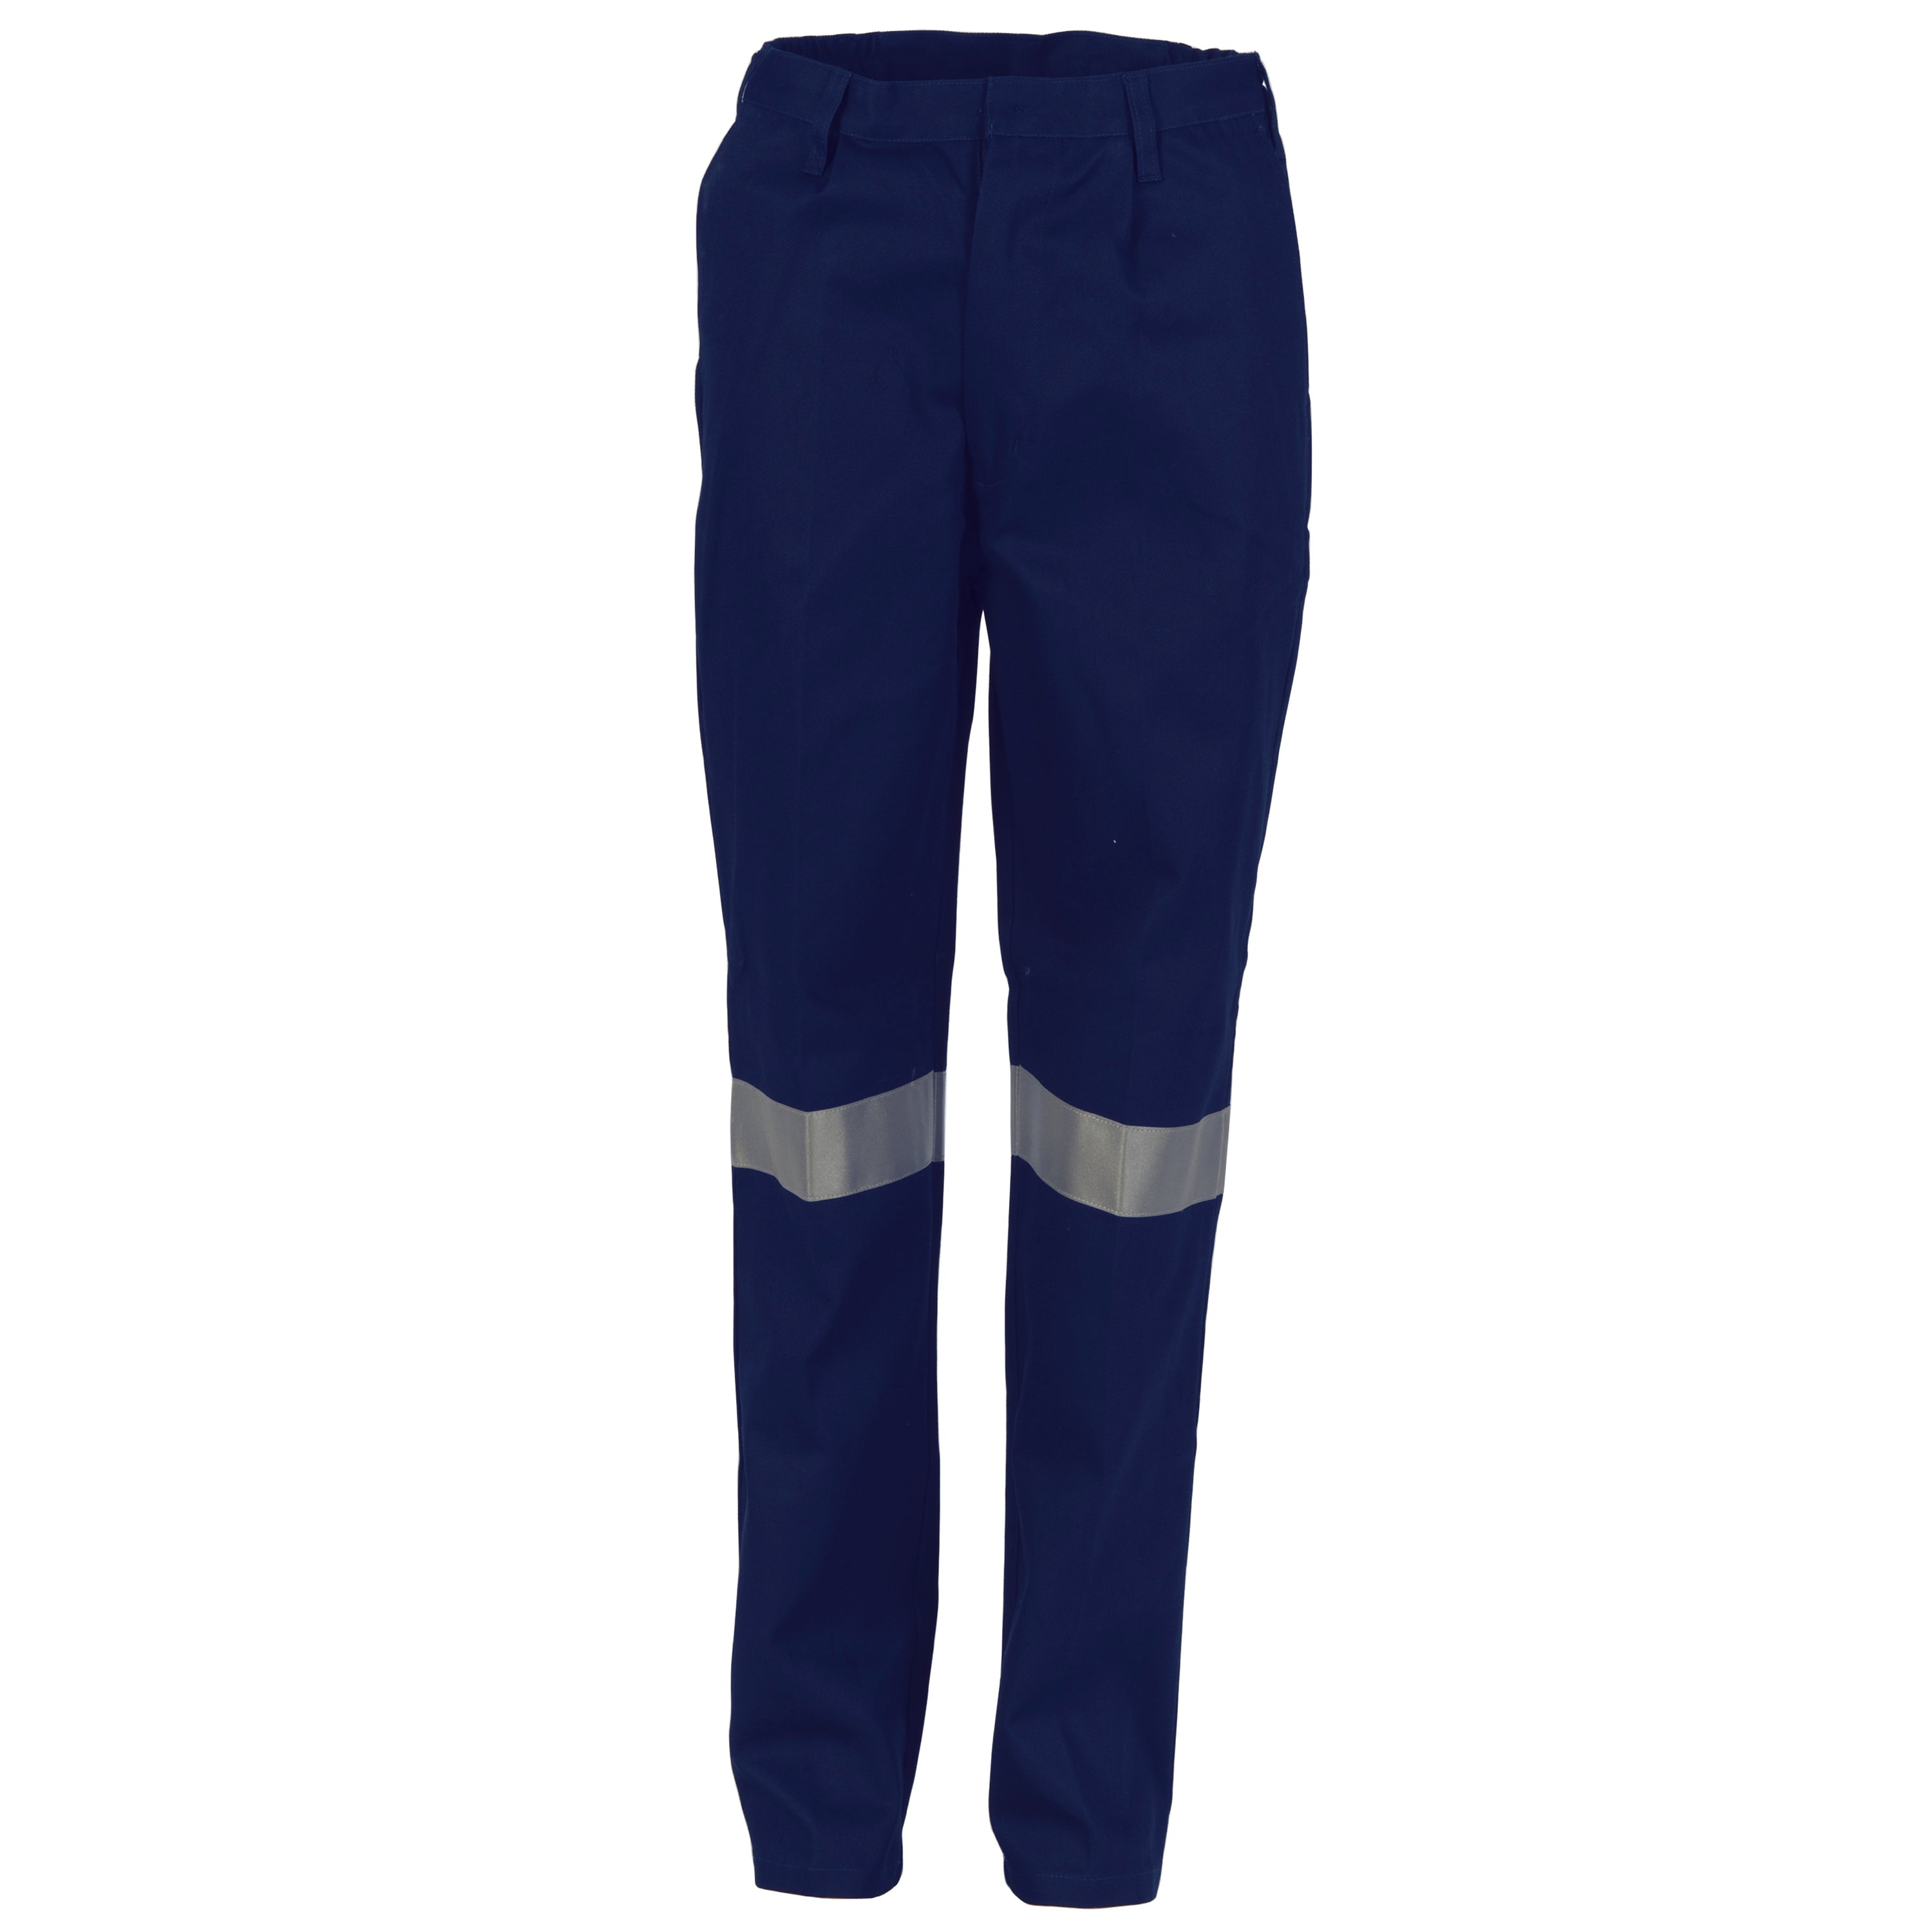 DNC - 3328 Ladies Navy Cotton Drill Pants With 3M Reflective Tape